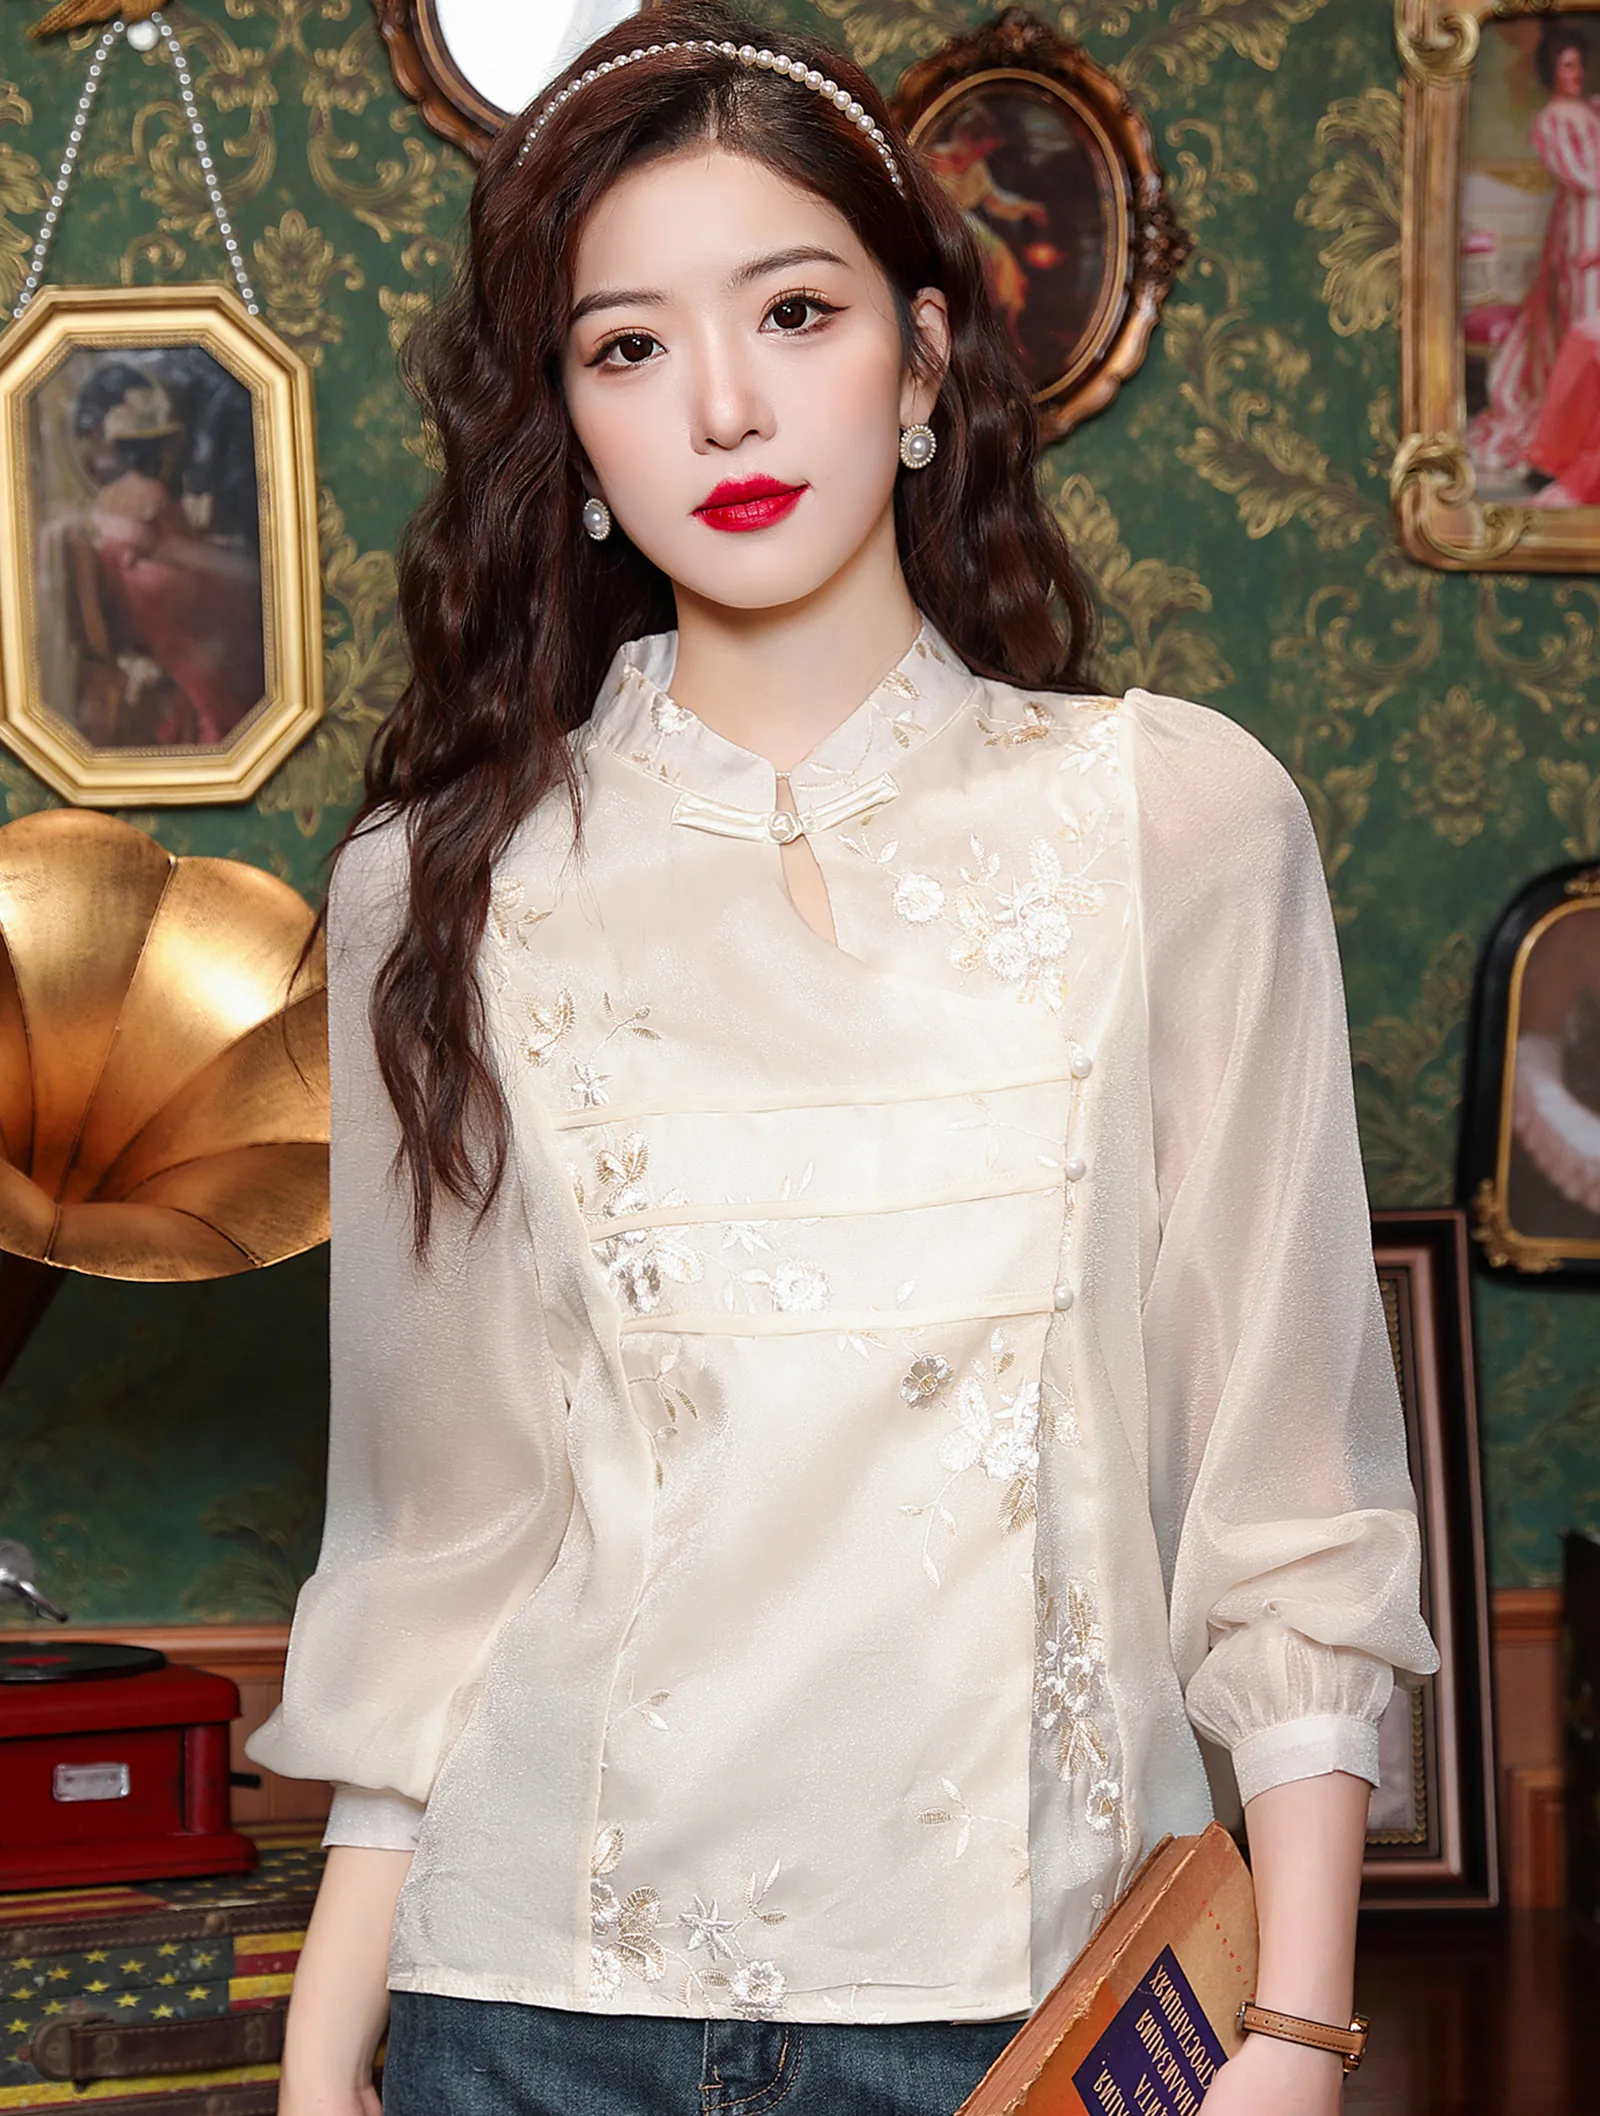 Women's Soft Embroidery Full Tulle Sleeve Chiffon Casual Shirt Tops02